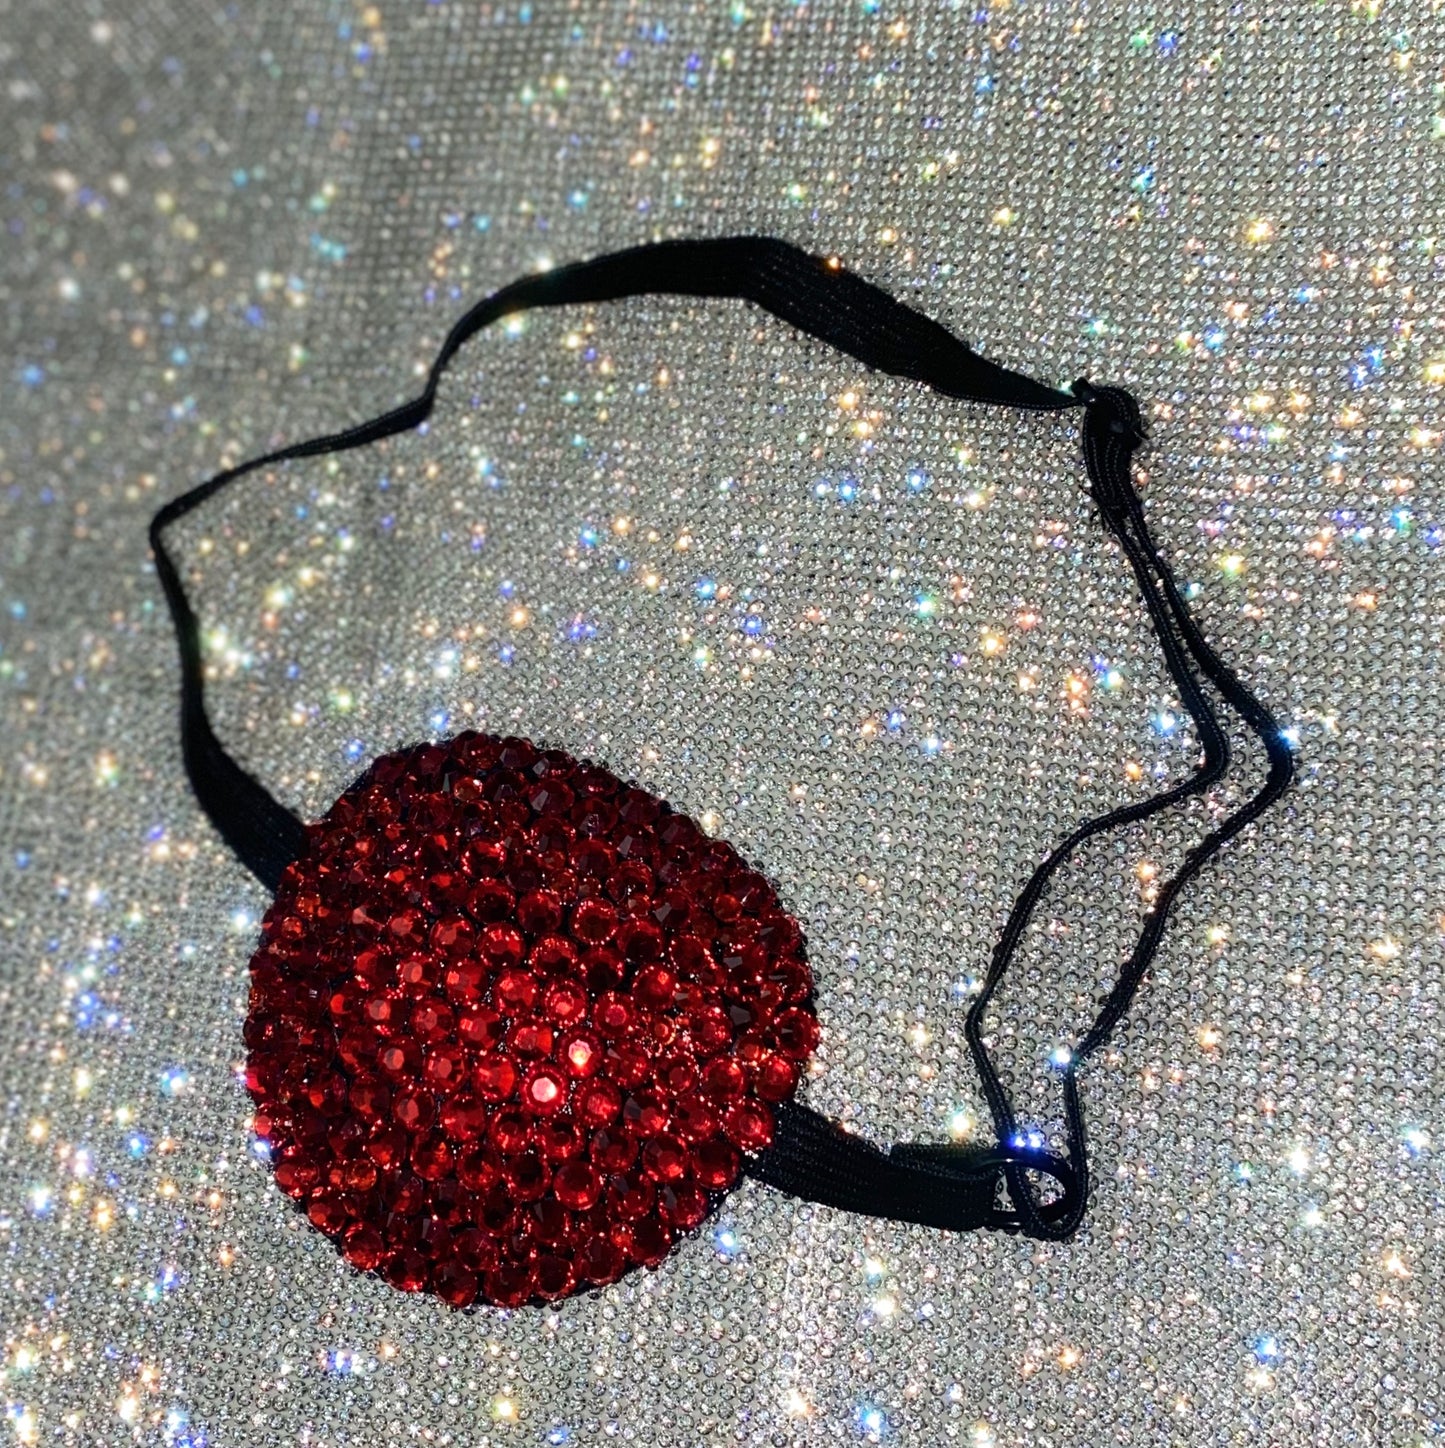 Black Padded Medical Patch In Siam Red Crystal Eye Patch